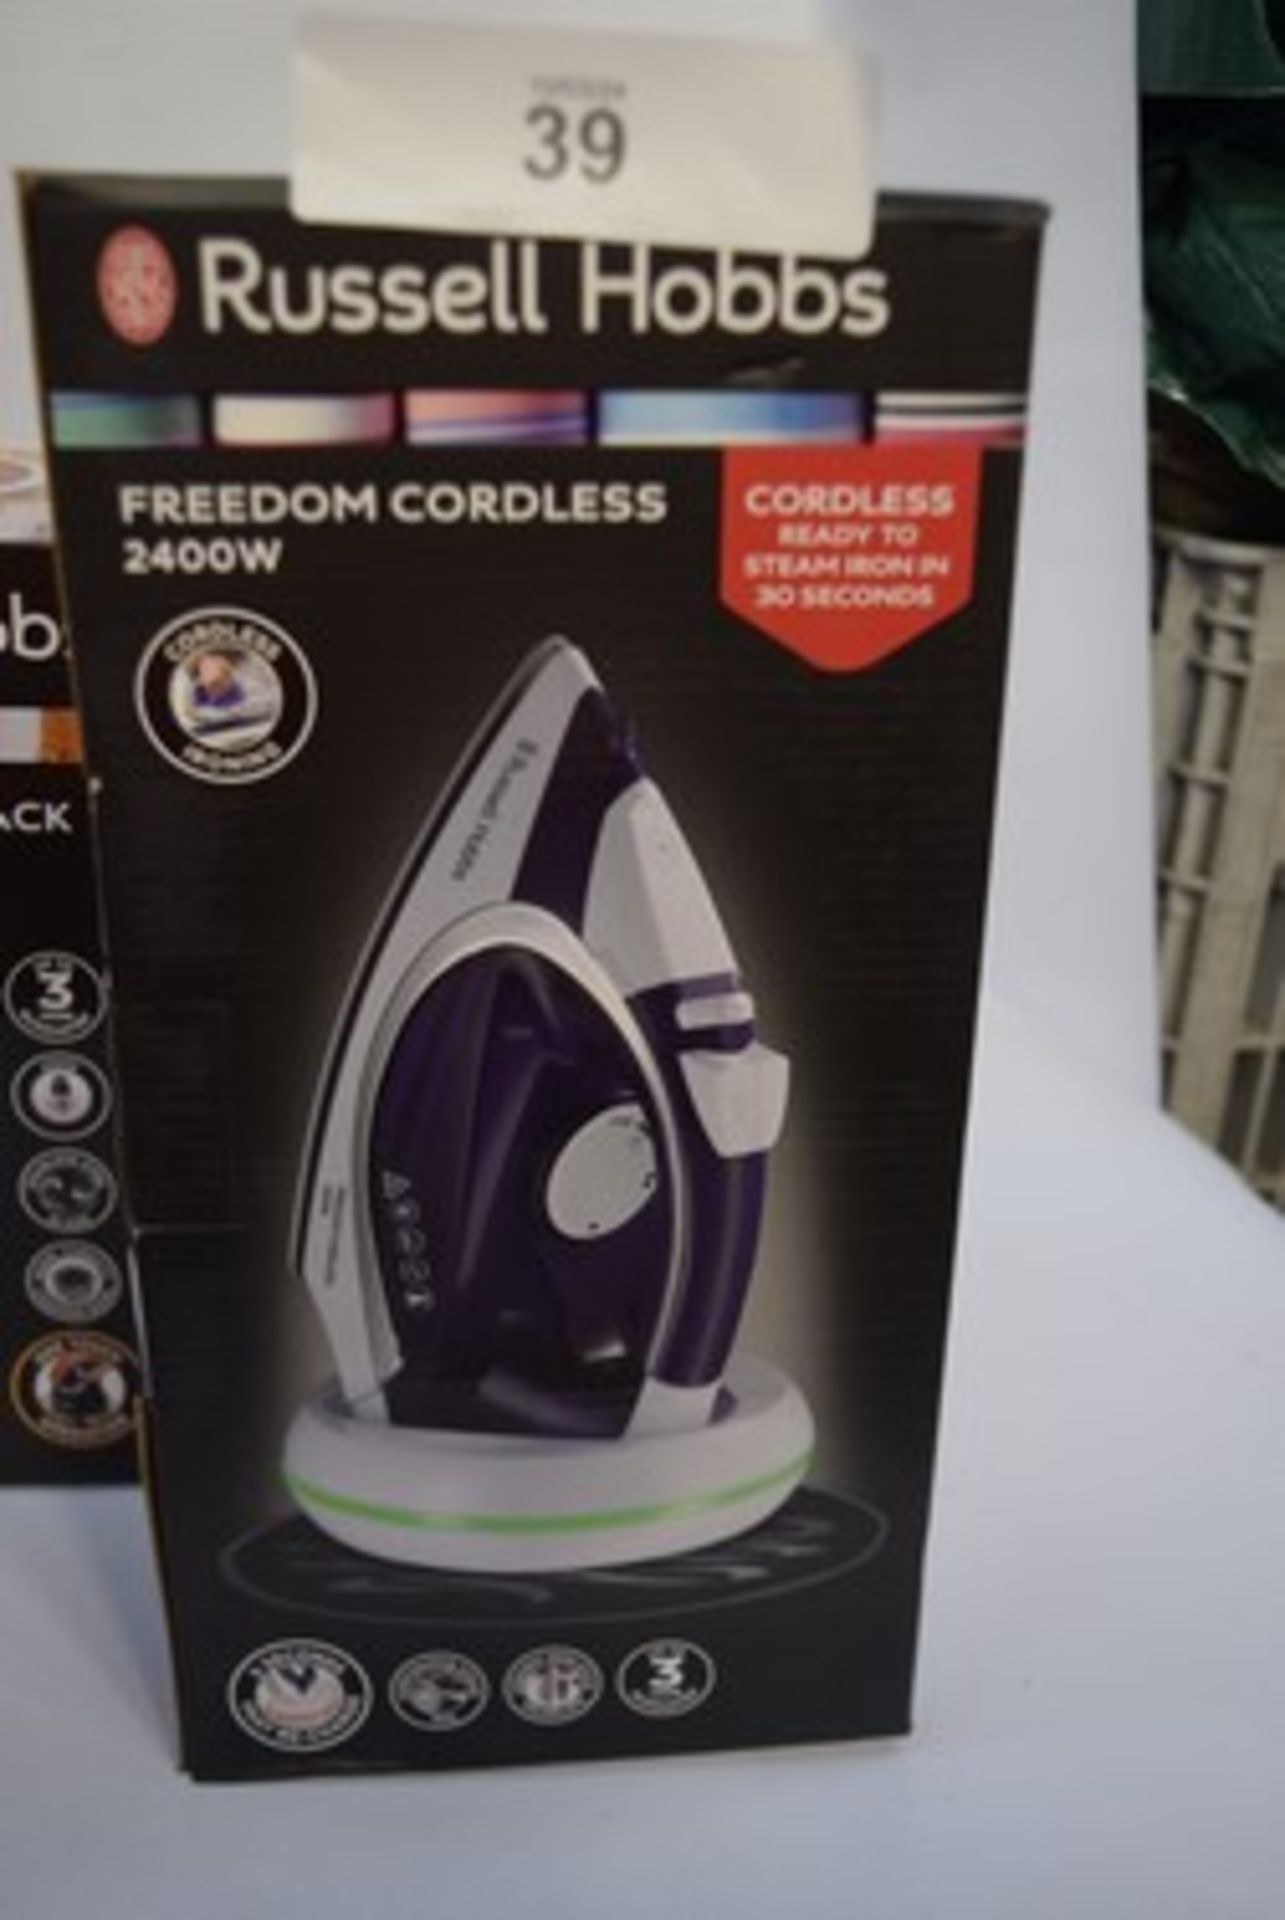 5 x electrical products, including Sage Smart kettle, Russell Hobbs cordless iron and Tower air - Image 2 of 6